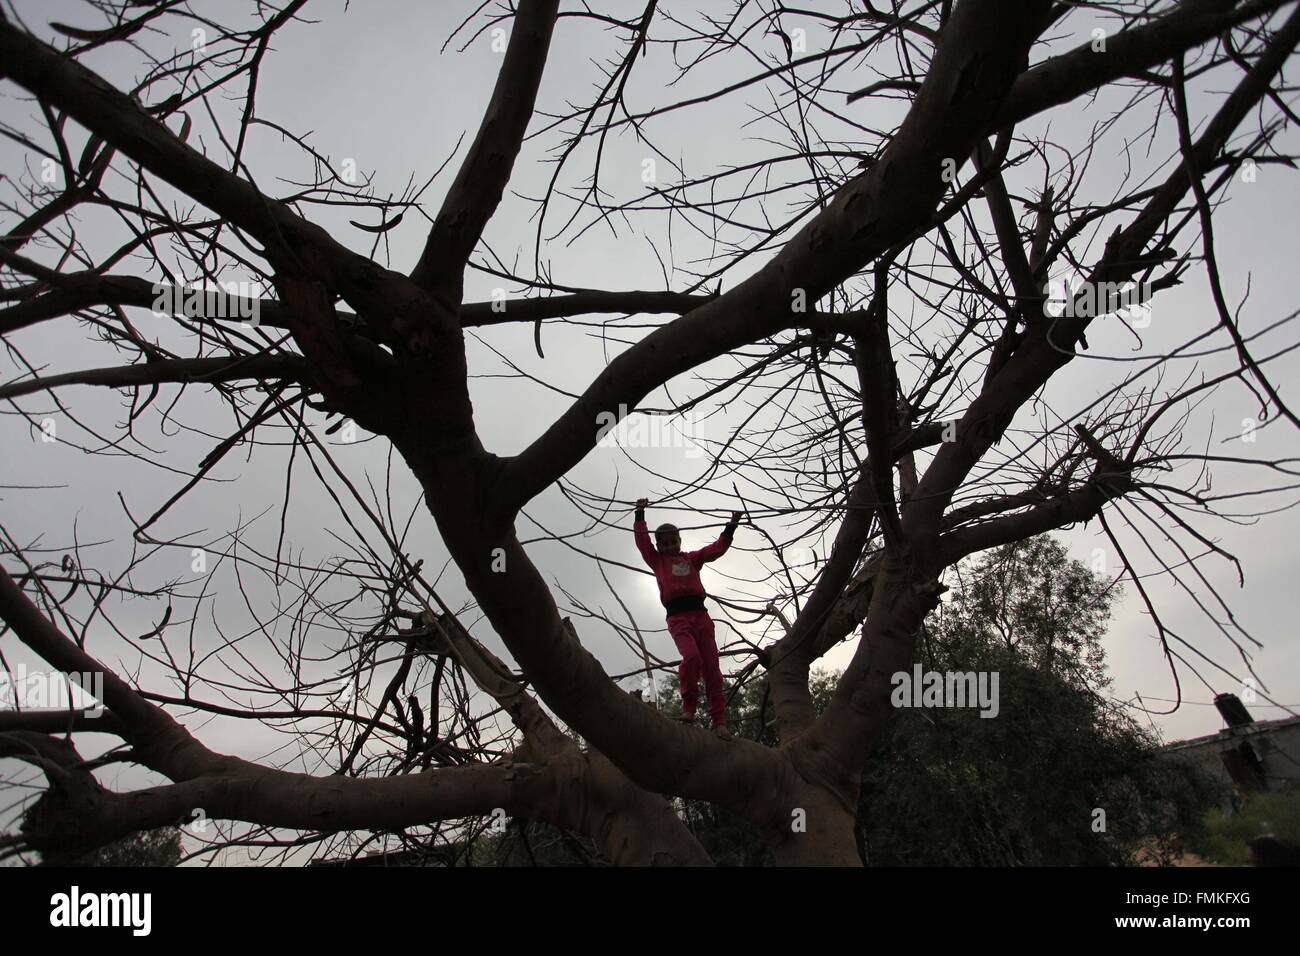 Gaza City, Gaza Strip, Palestinian Territory. 12th Mar, 2016. Palestinian girls climb up a tree during the funeral of Israa Abu Khussa, 6, on March 12, 2016 in Beit Lahiya in the north of the Gaza strip. Israeli planes struck the bases of the Hamas group's military wing, the Ezzedine al-Qassem Brigades, in the Gaza Strip, killing Yasin Abu Khussa living near one of the targets and injuring his sister, Gaza health ministry spokesman Ashraf al-Qudra said. The strikes came hours after four rockets fired from the Gaza Strip by Palestinian militants hit neighbouring Israel (Credit Image: © Ashra Stock Photo